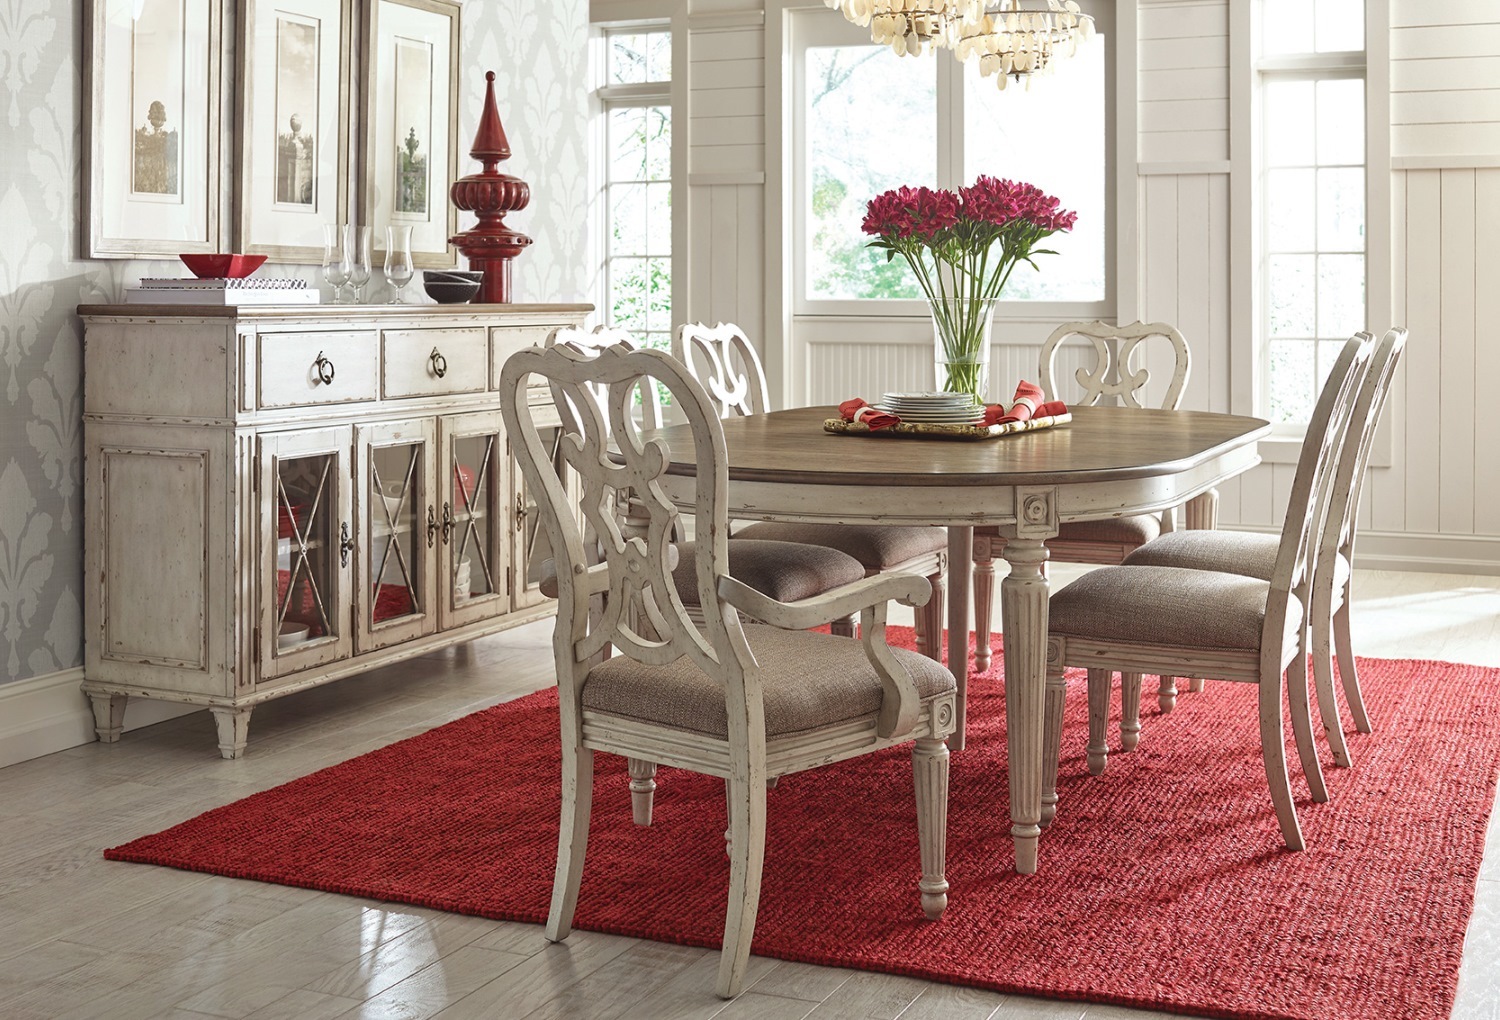 American Drew Furniture Of North Ina, American Drew Cherry Grove Dining Room Furniture